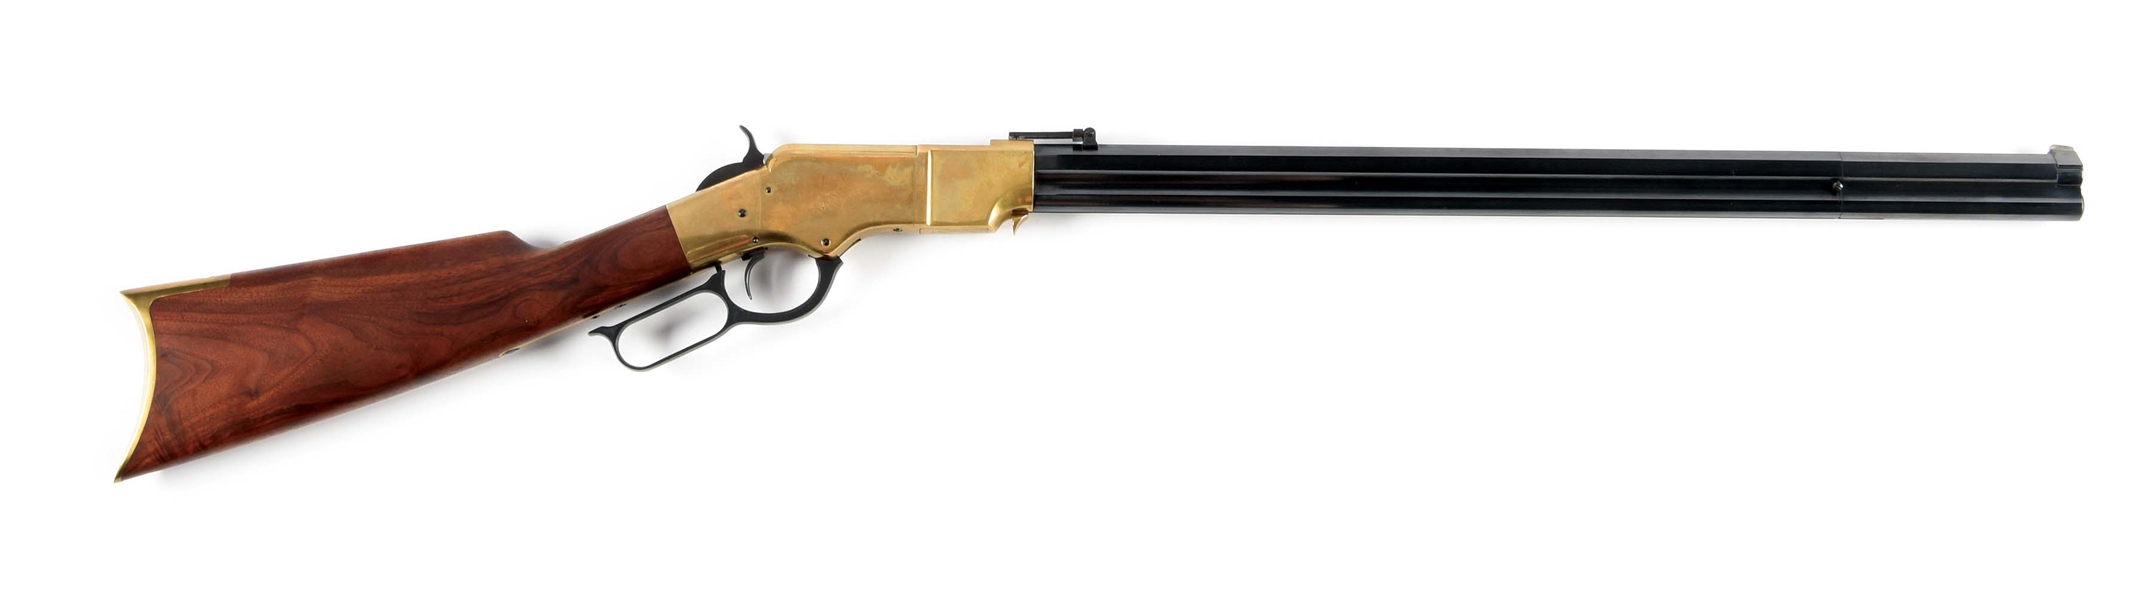 (M) REPLICA HENRY LEVER ACTION RIFLE.